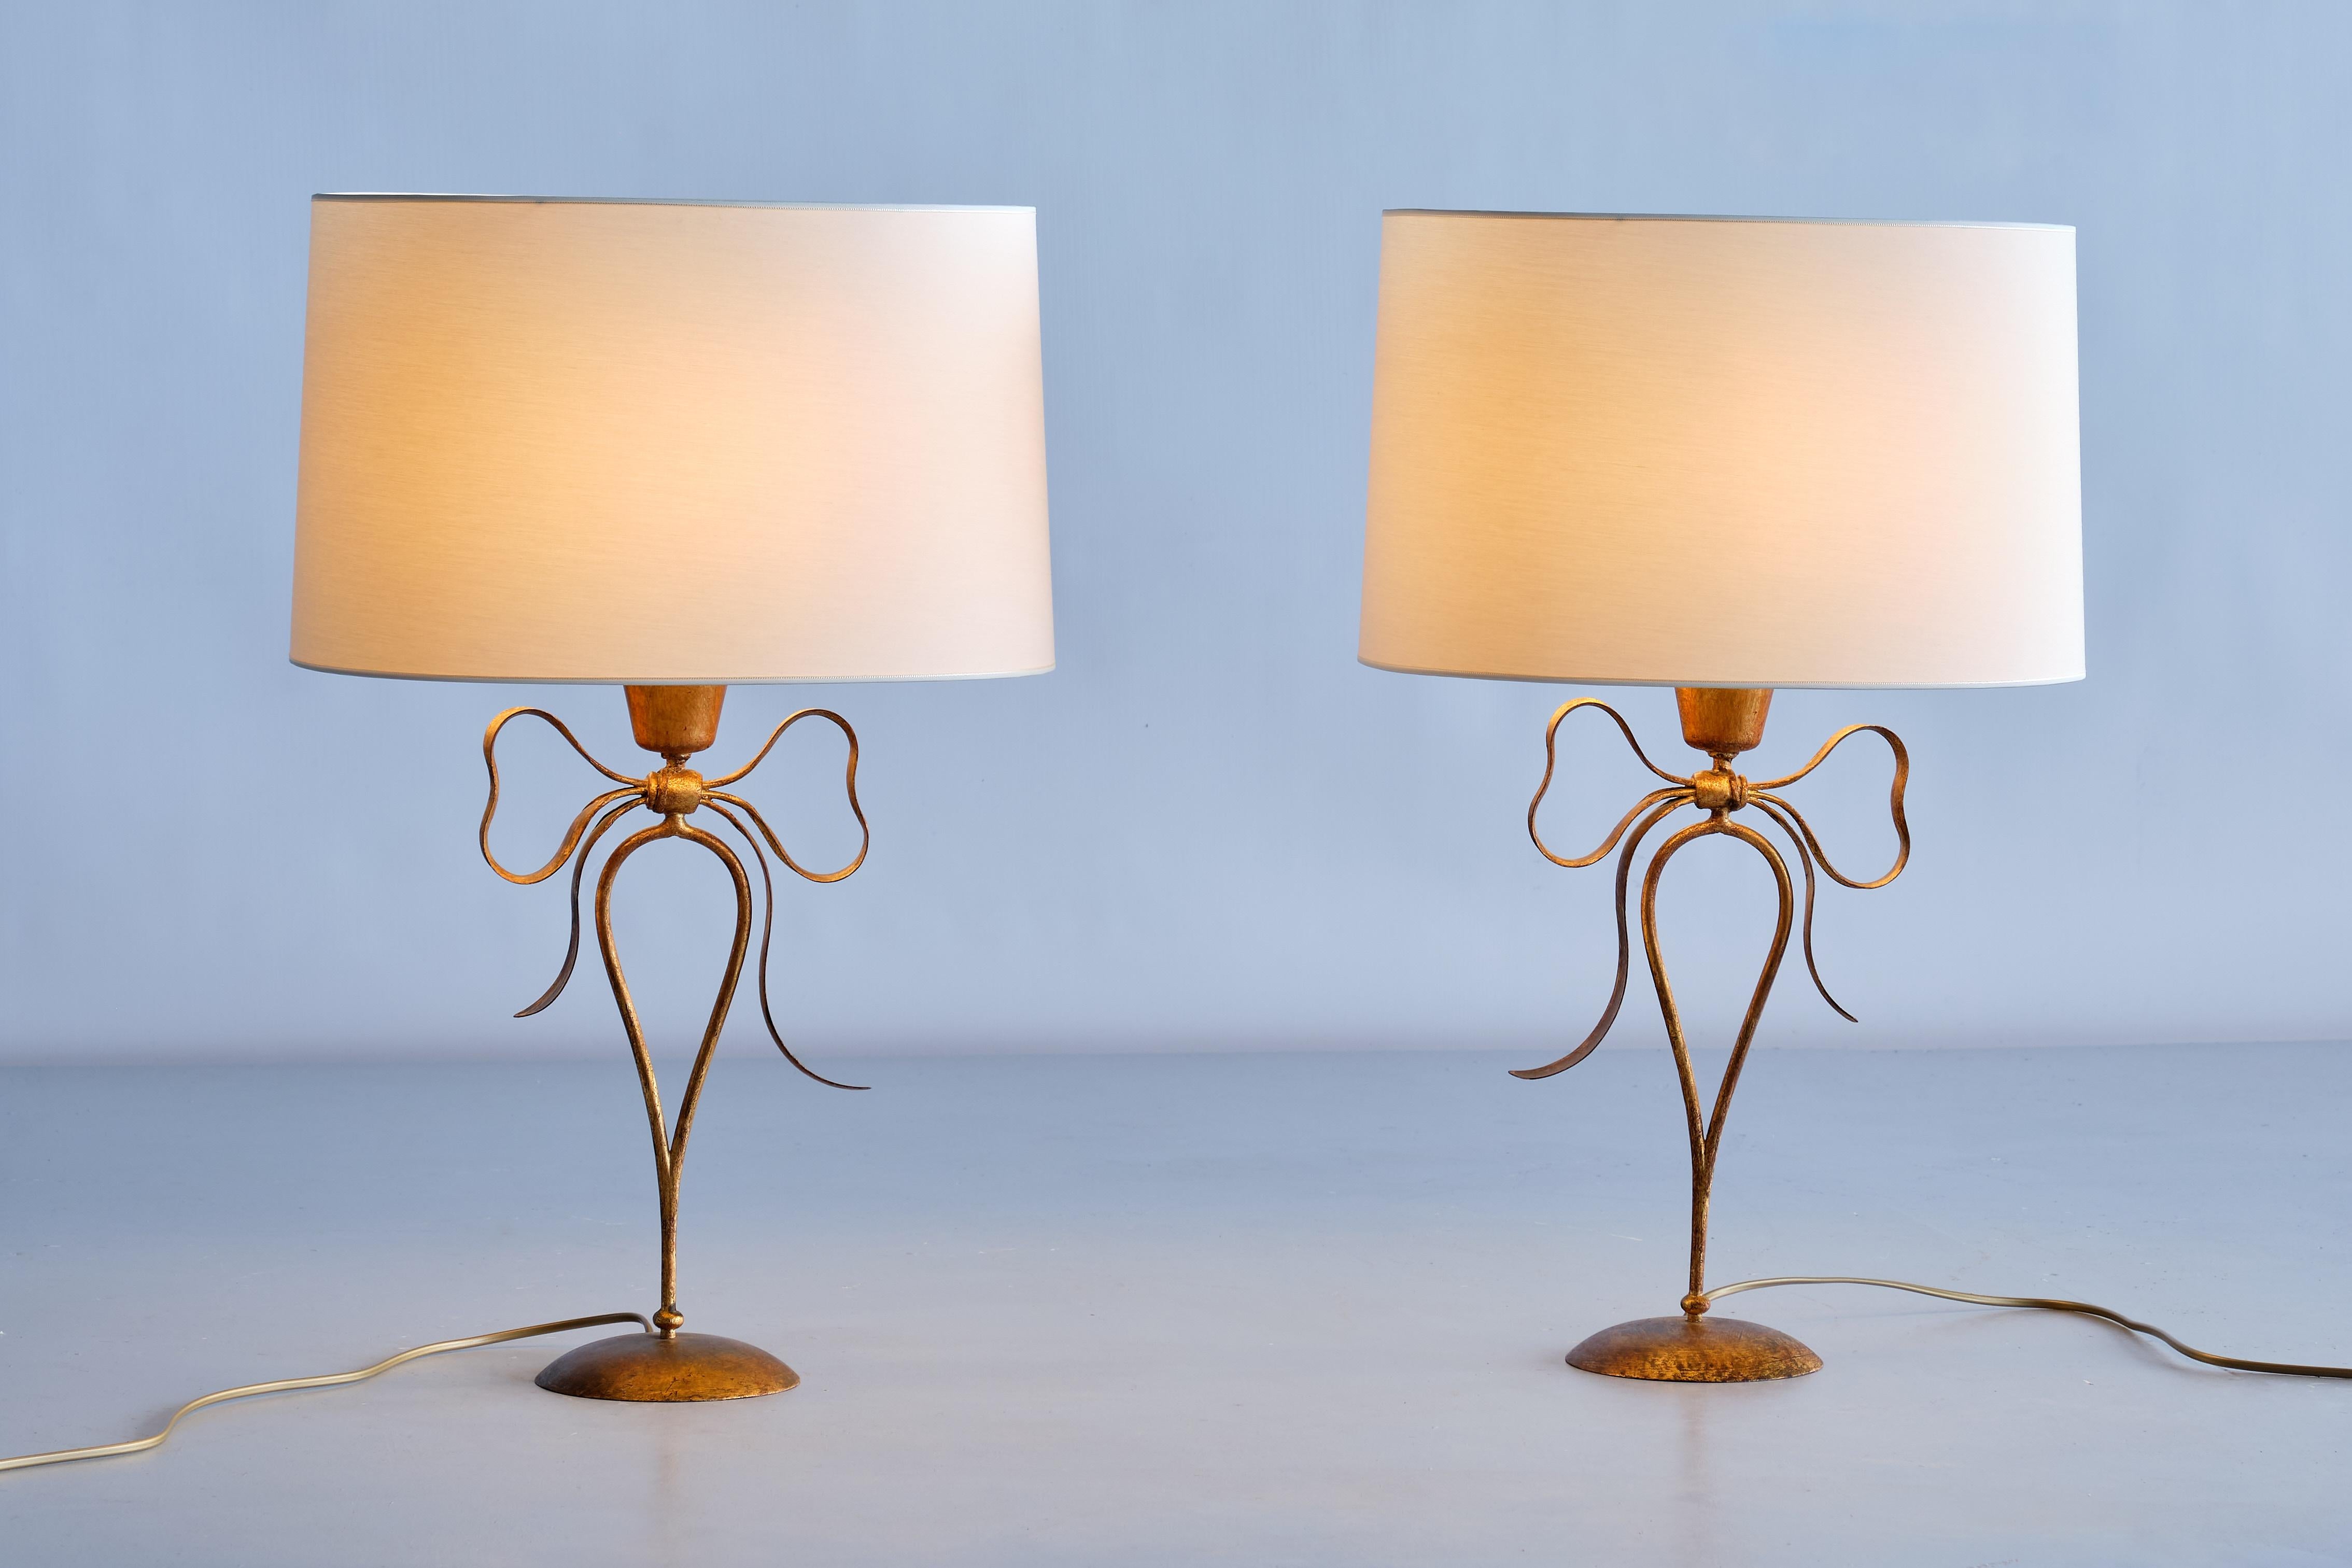 Pair of Gilded Bow Shaped Table Lamps by Mingazzi Bologna, Italy, 1950s 2